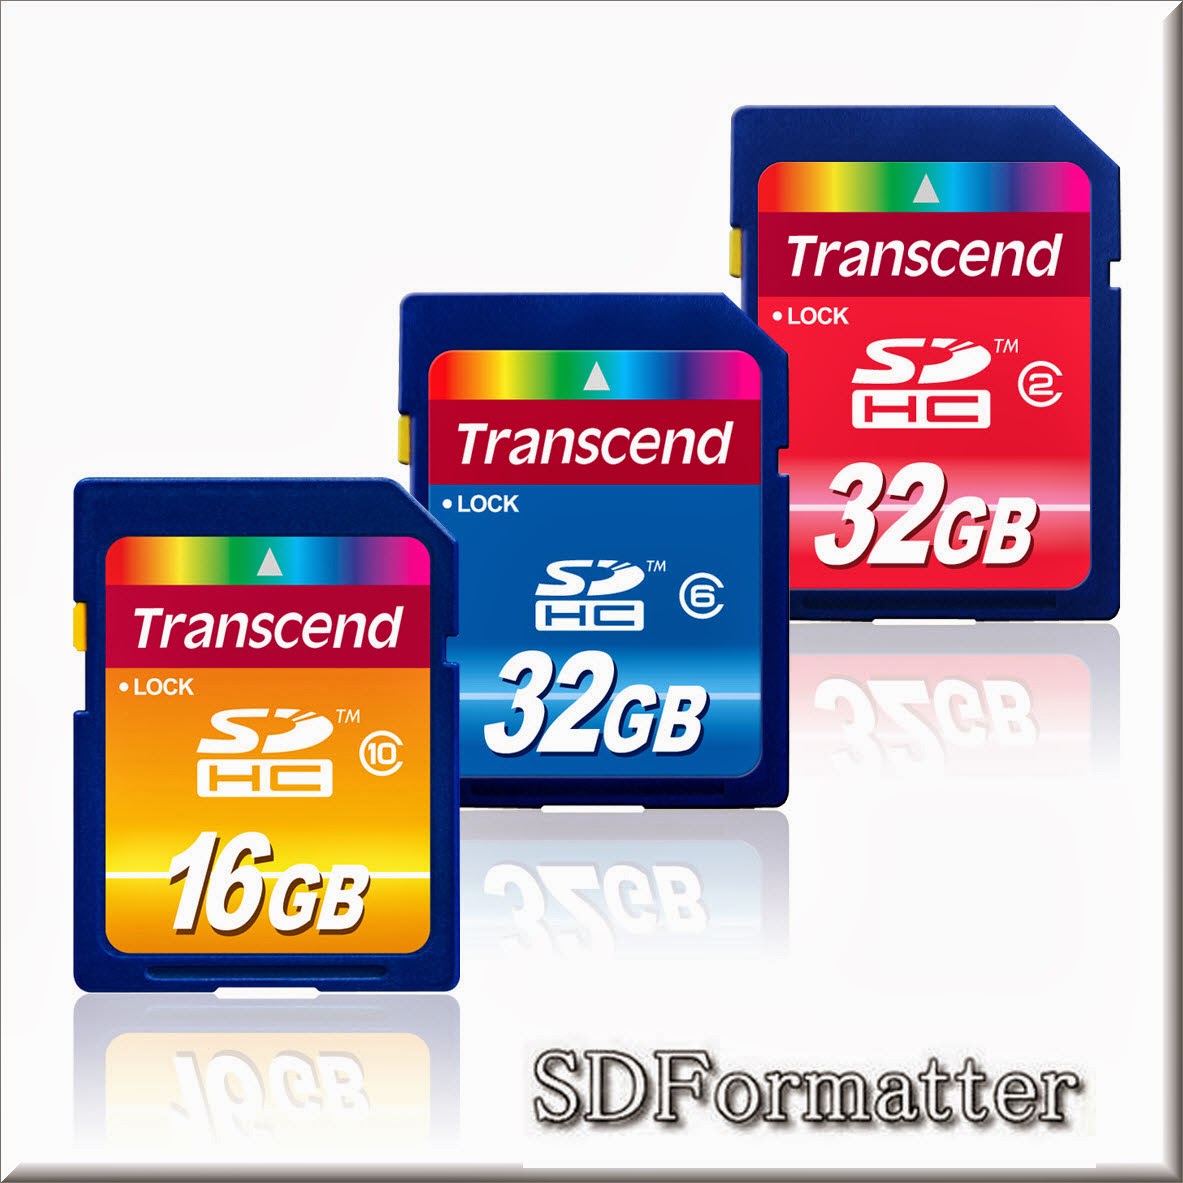 The Best SD formatter V4 Software to format SD card ,SDHC ...